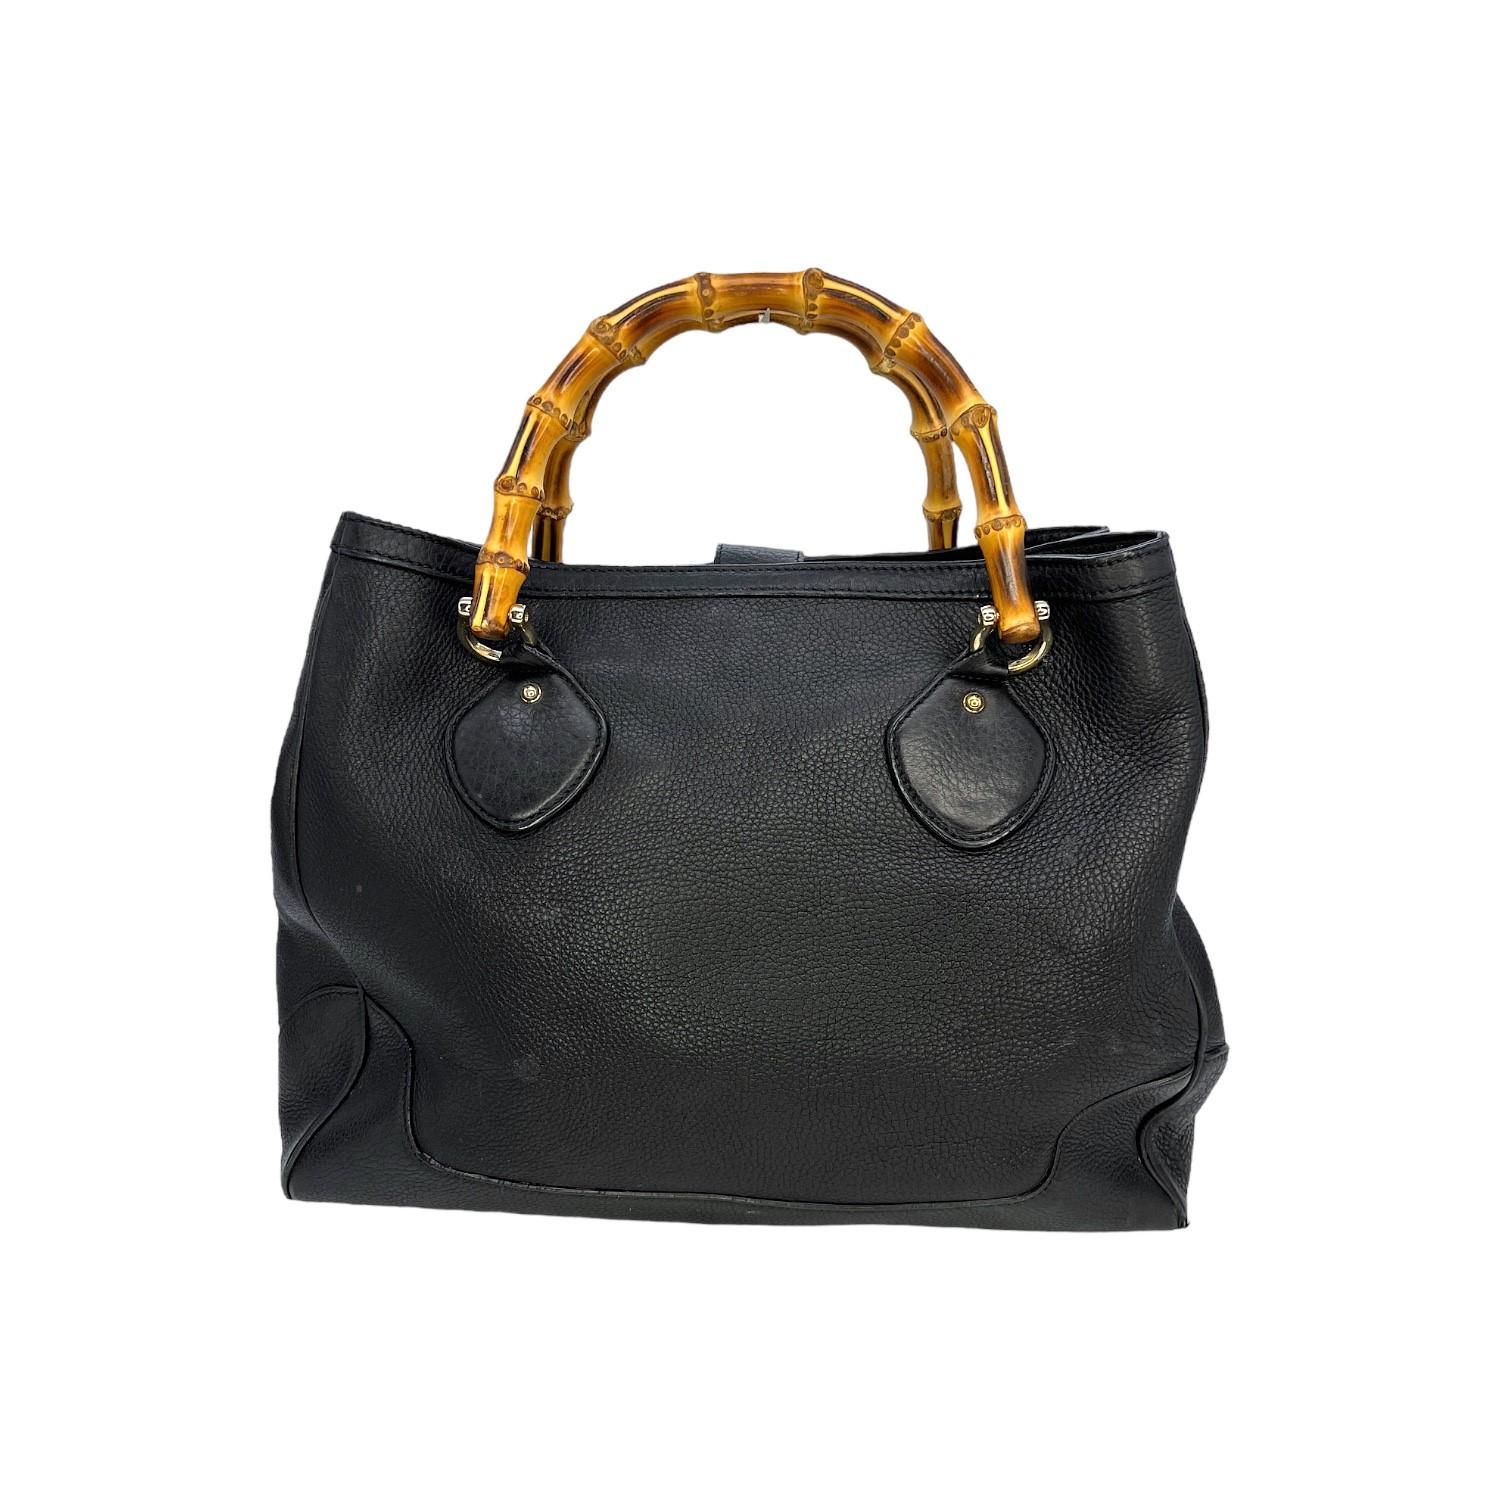 This Gucci Pebbled Leather Bamboo Diana Tote was made in Italy and it is finely crafted of a black pebbled leather exterior with gold-tone hardware features. It has round bamboo top handles. It has a magnetic snap closure and it opens up to a very